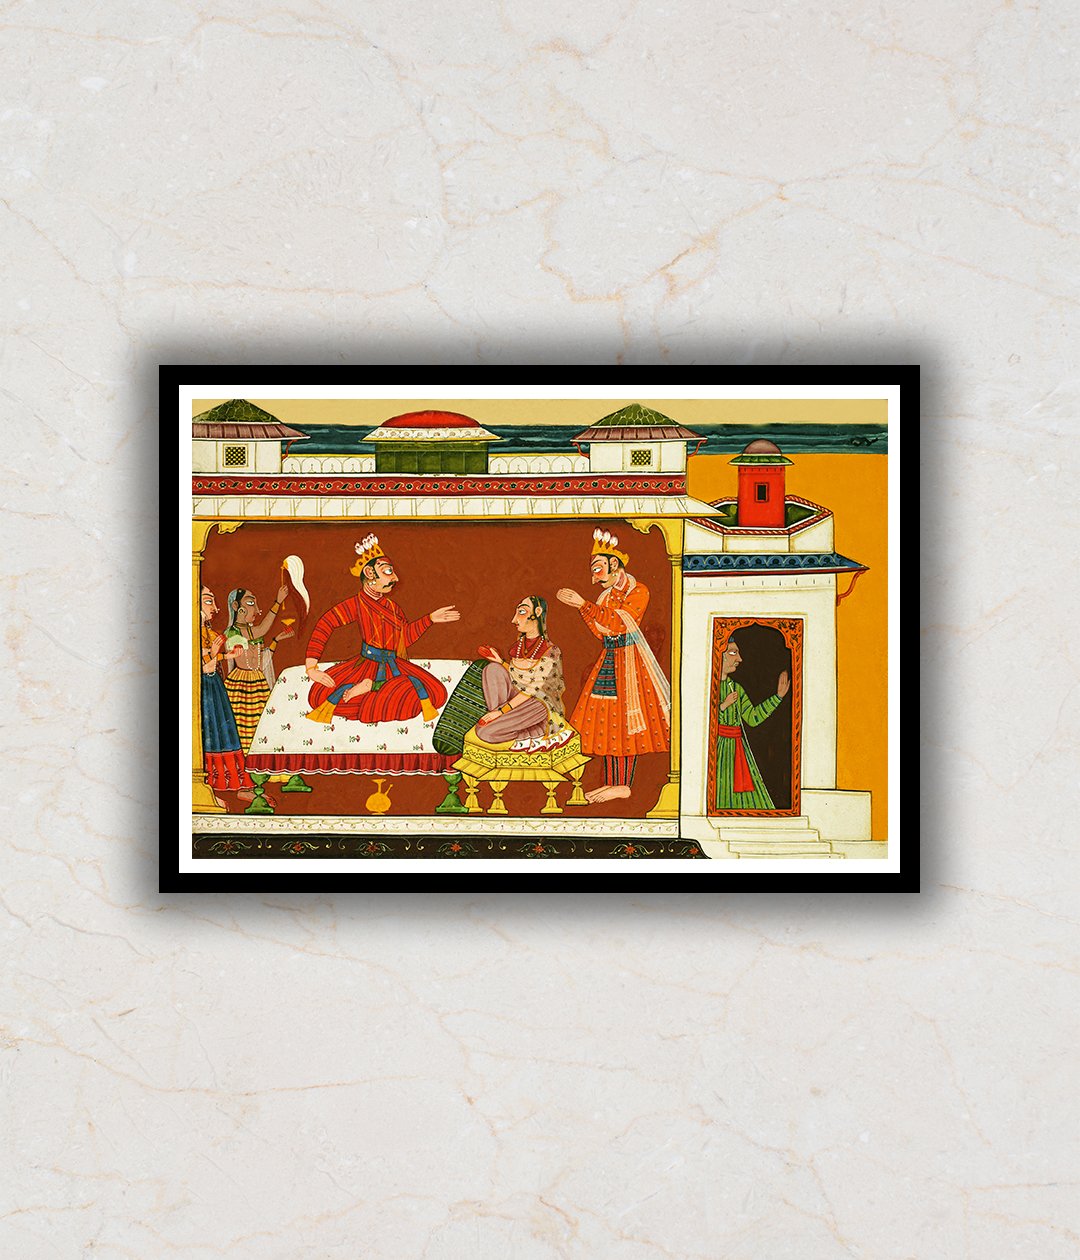 The King's Welcome Tarditional Indian Art Painting For Home Wall Art Decor